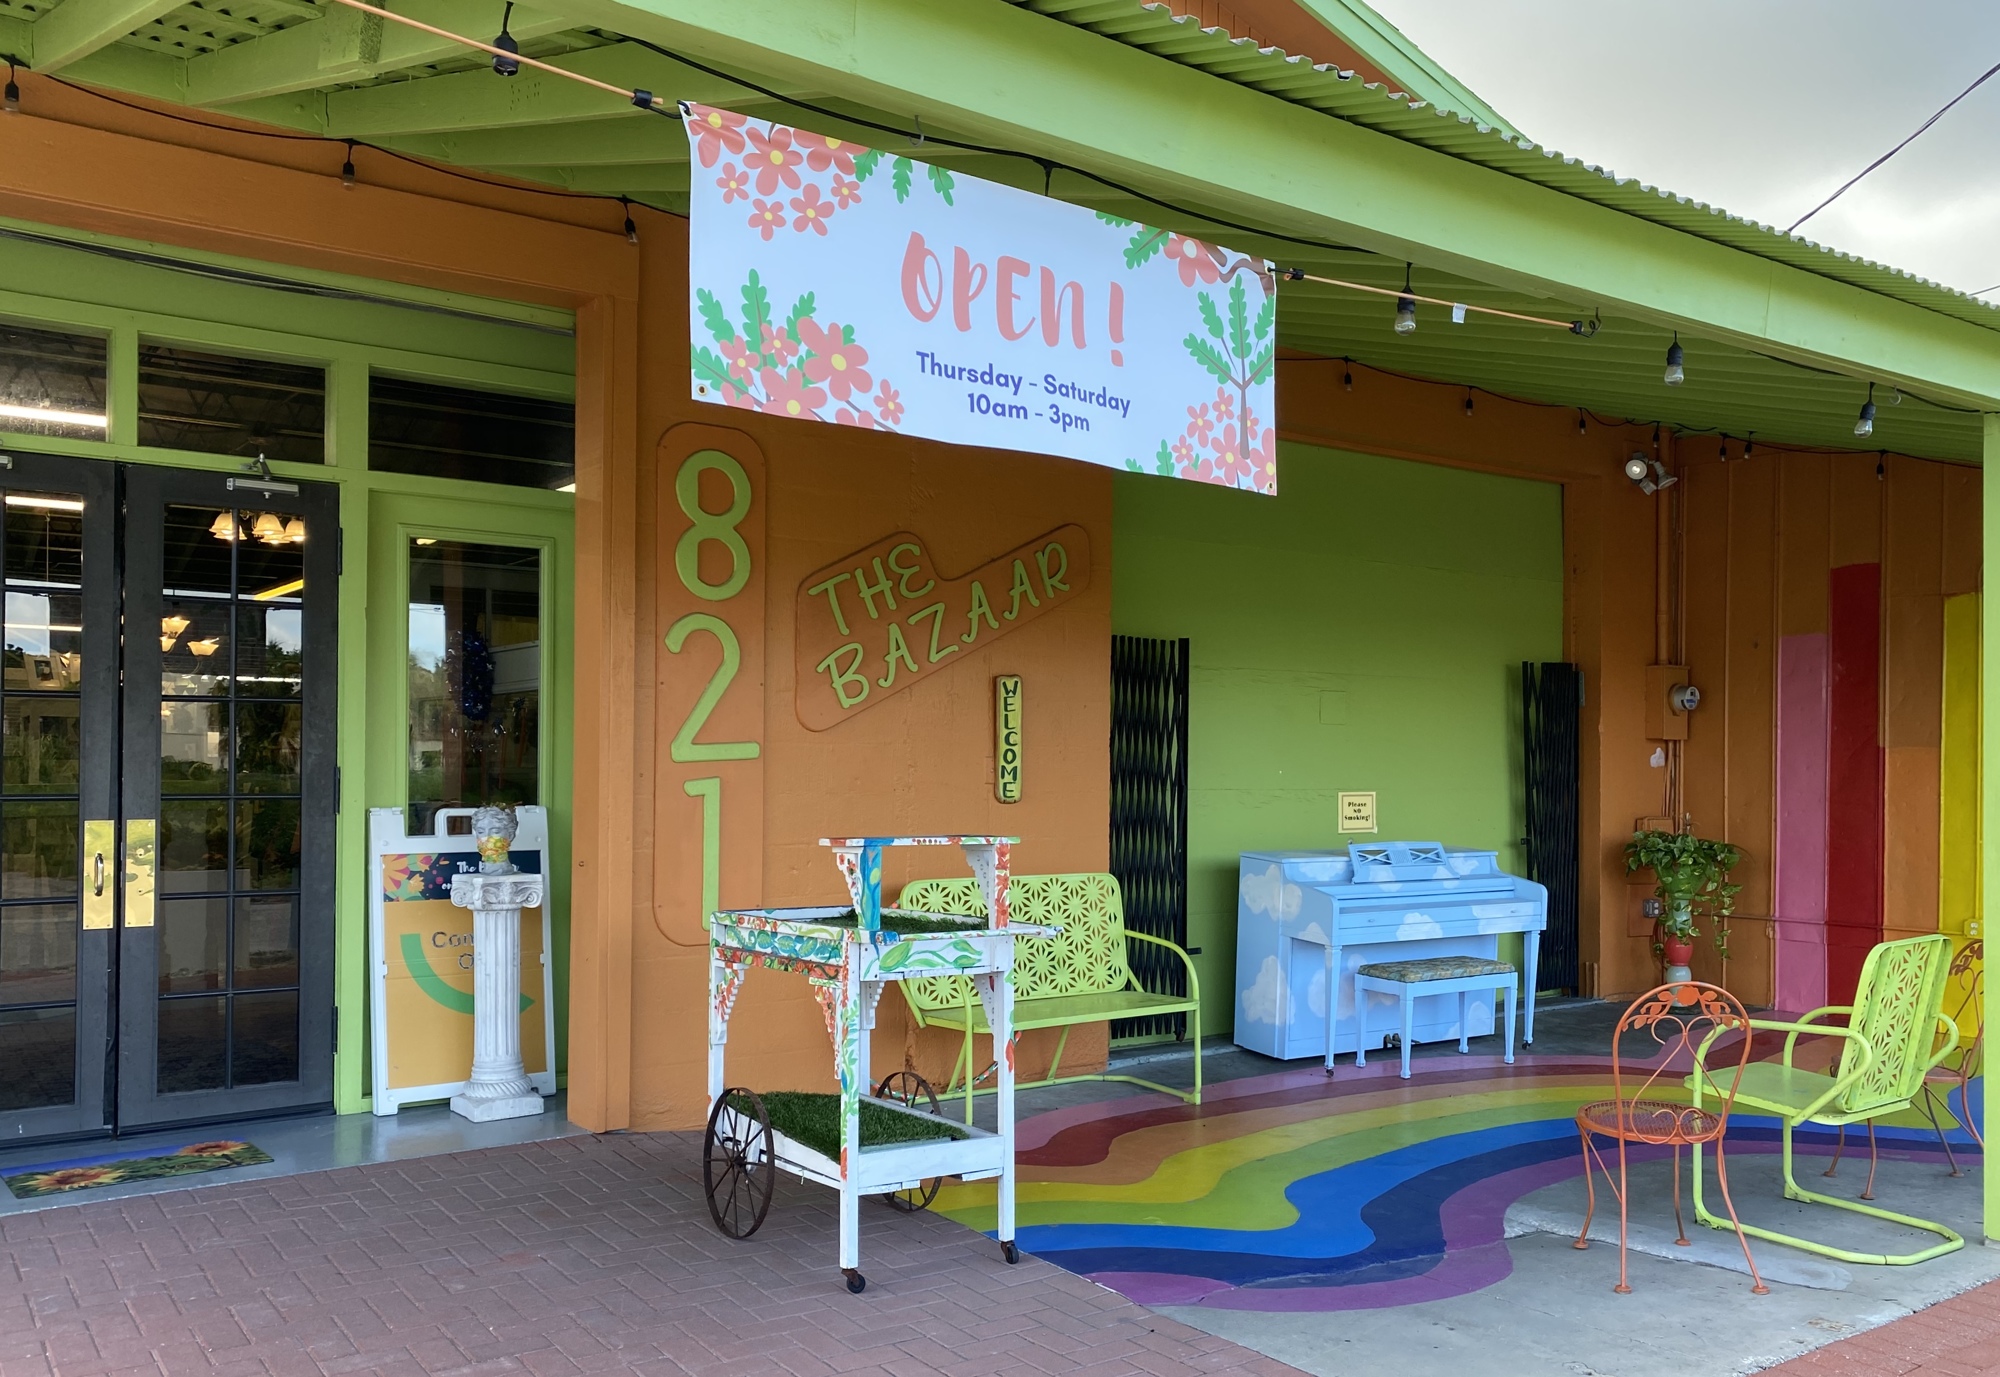 Courtesy. The Bazaar on Apricot & Lime is one of several businesses in the Limelight District, an area on Lime Avenue from Fruitville Road to 12th Street that’s officially recognized by the City of Sarasota.